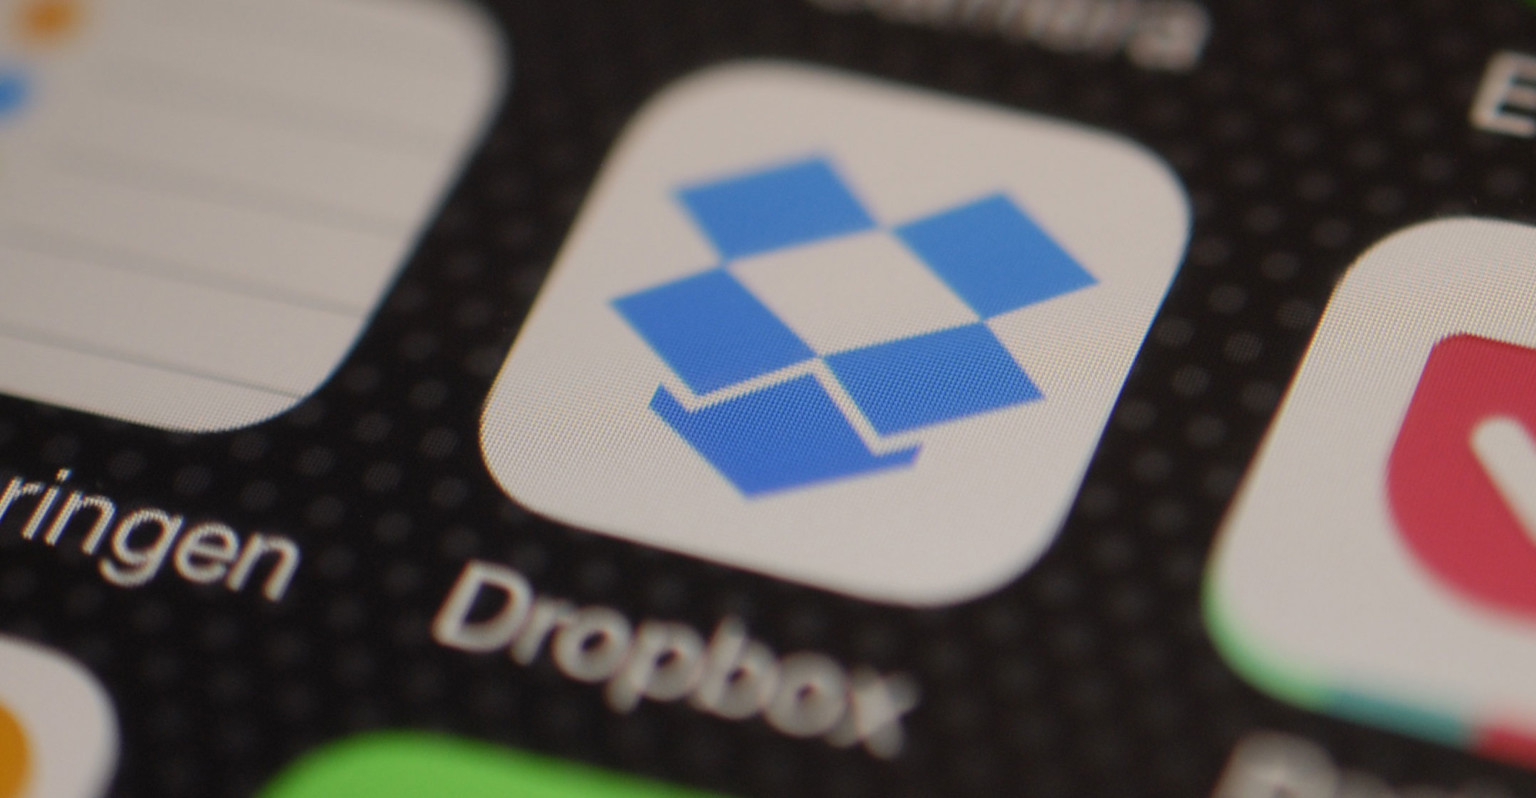 what are dropbox plans for the future